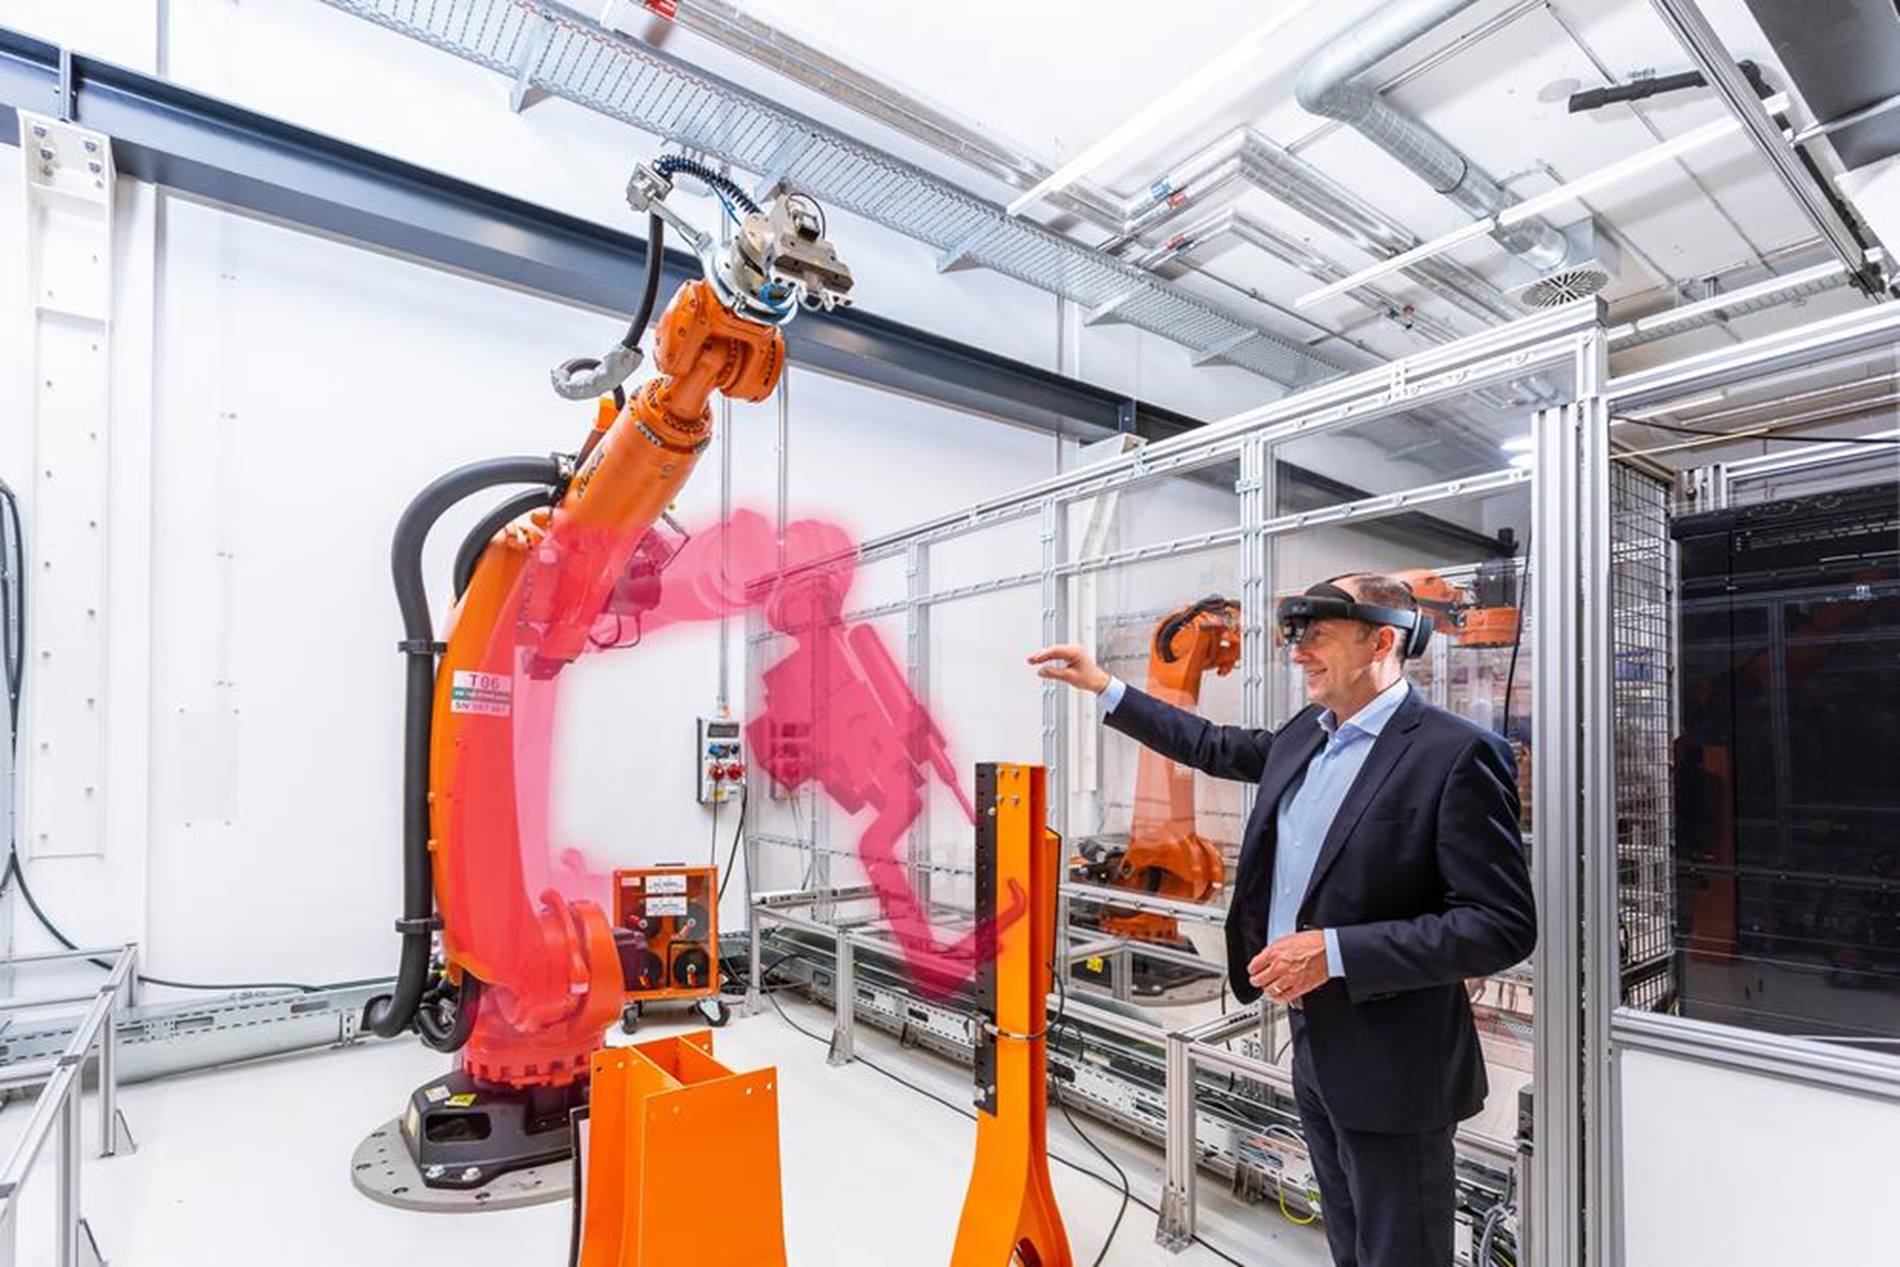 Mixed Reality is an idea from the KUKA Innovation Challenge. Now it is part of the product portfolio. Here, KUKA CEO Peter Mohnen moves the demonstrator.